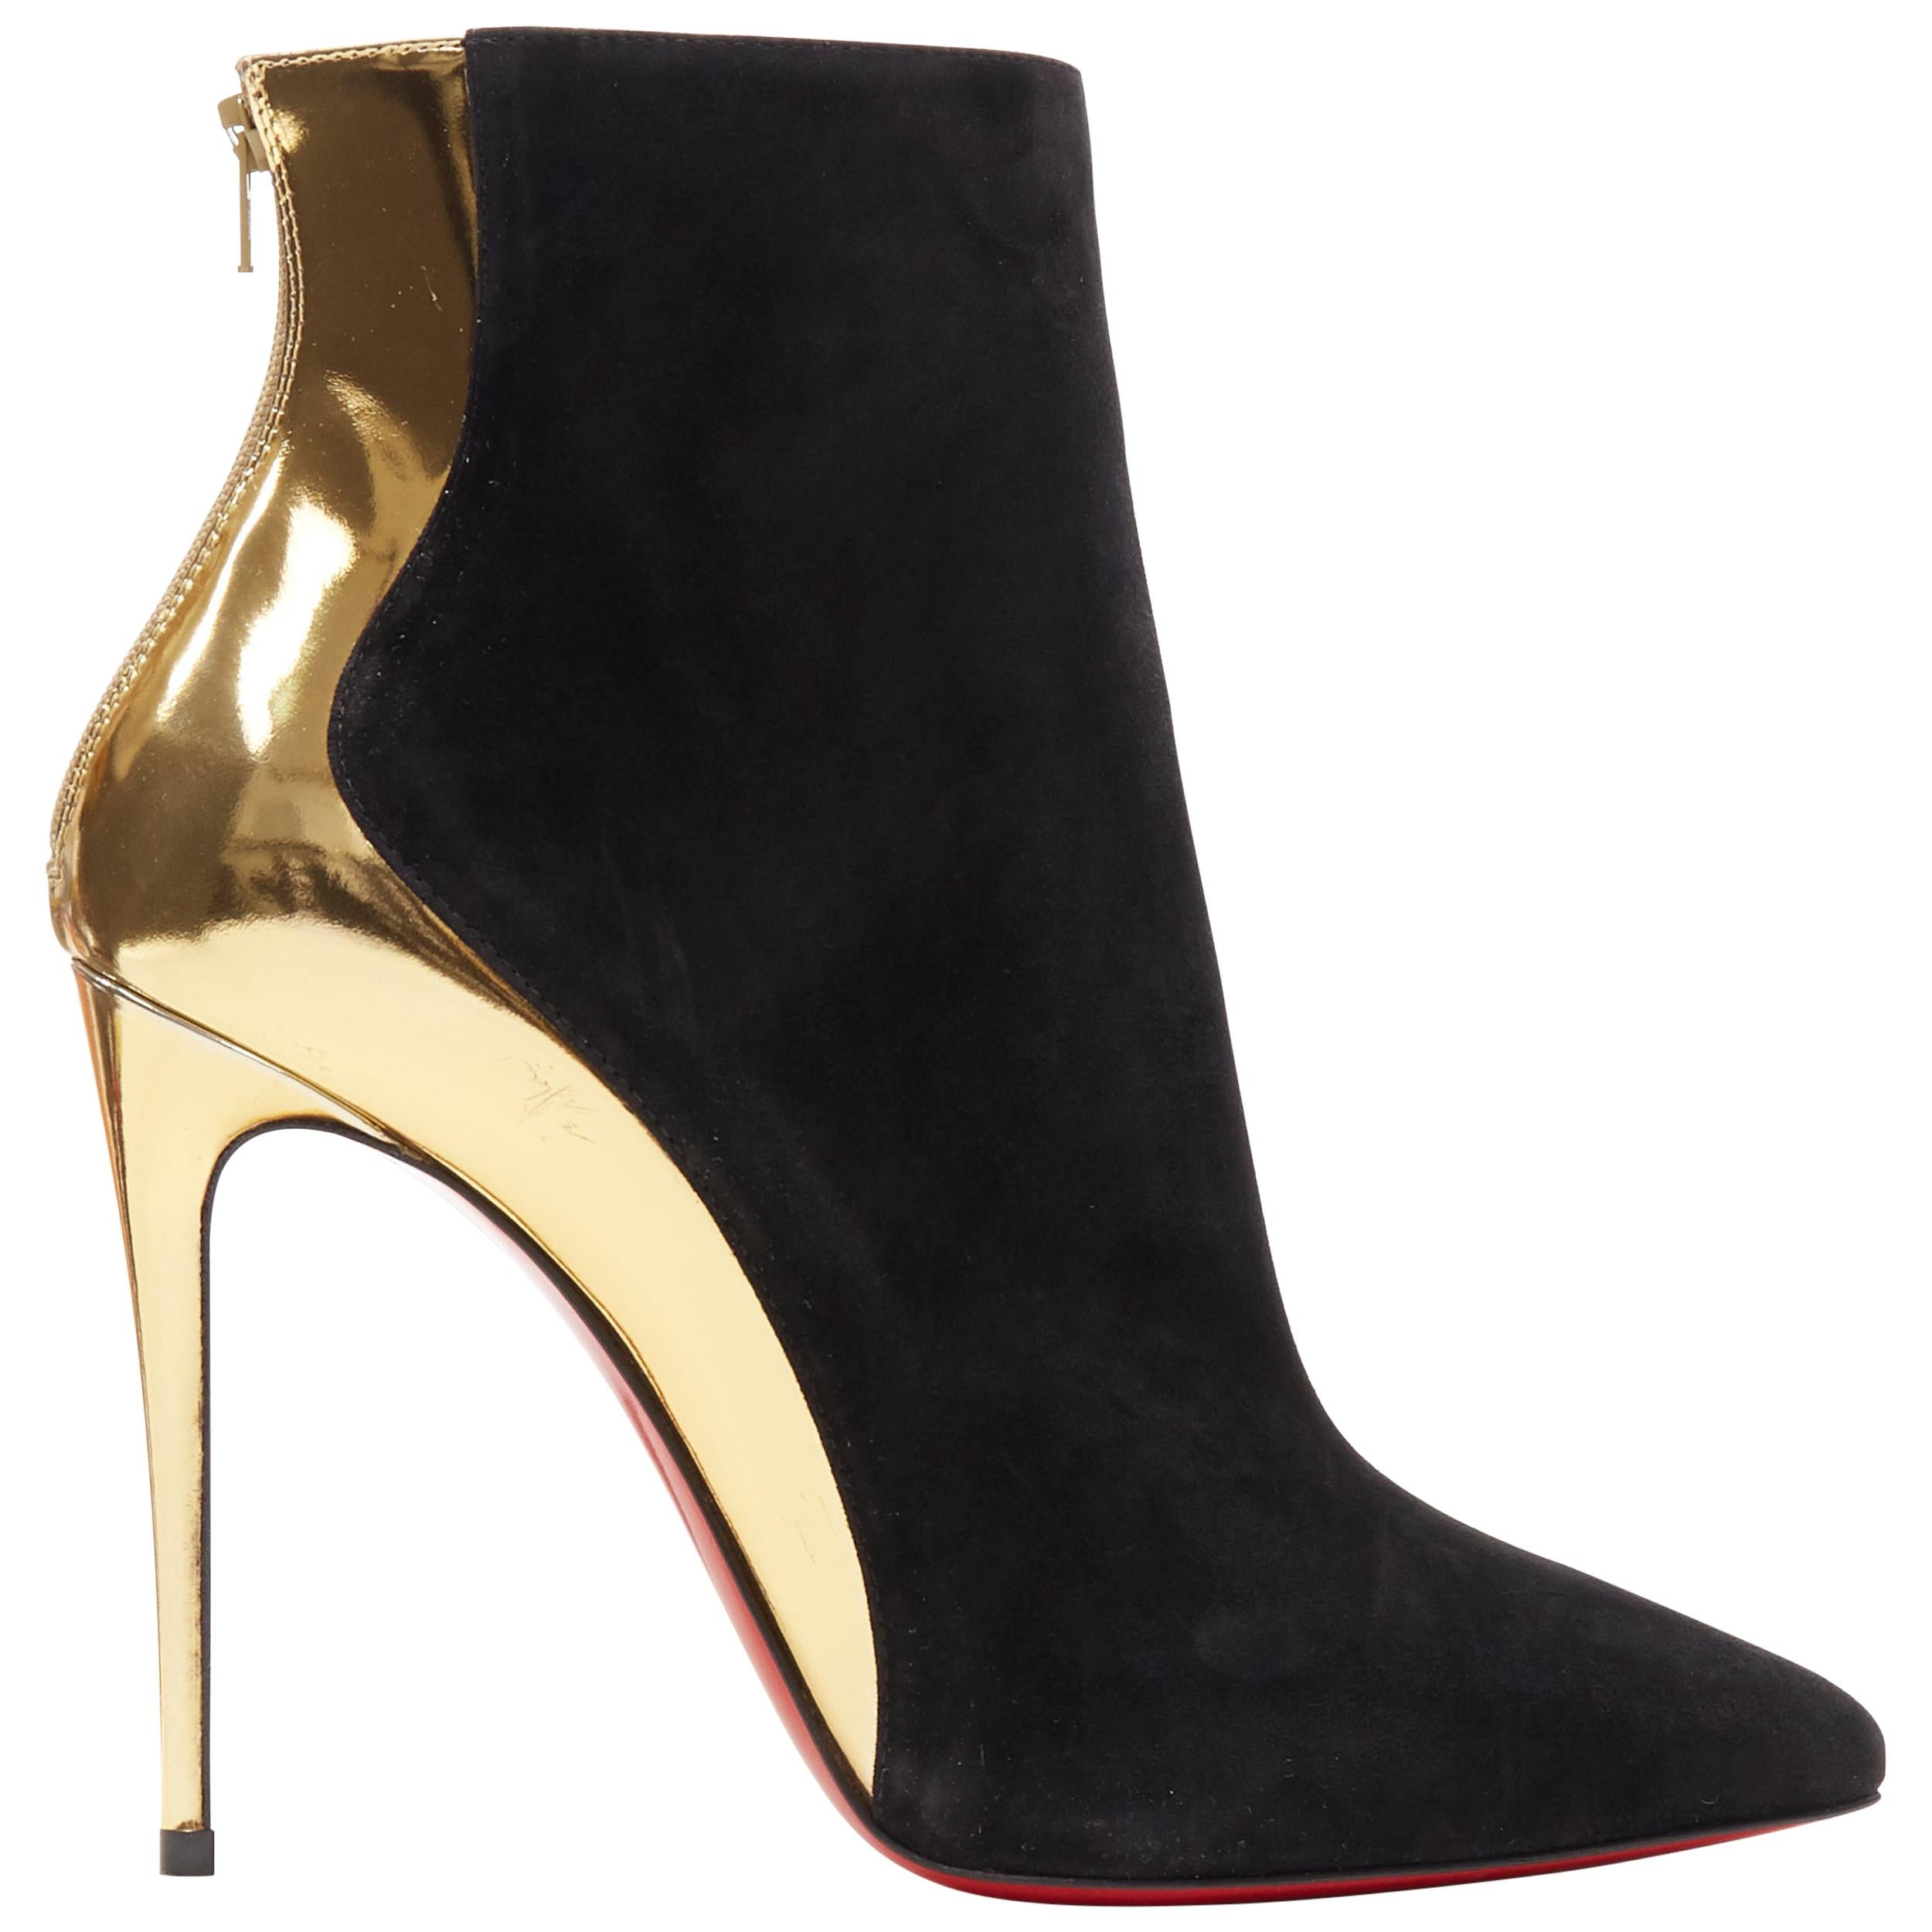 new CHRISTIAN LOUBOUTIN Delicotte 100 black suede gold mirrored heel bootie EU36